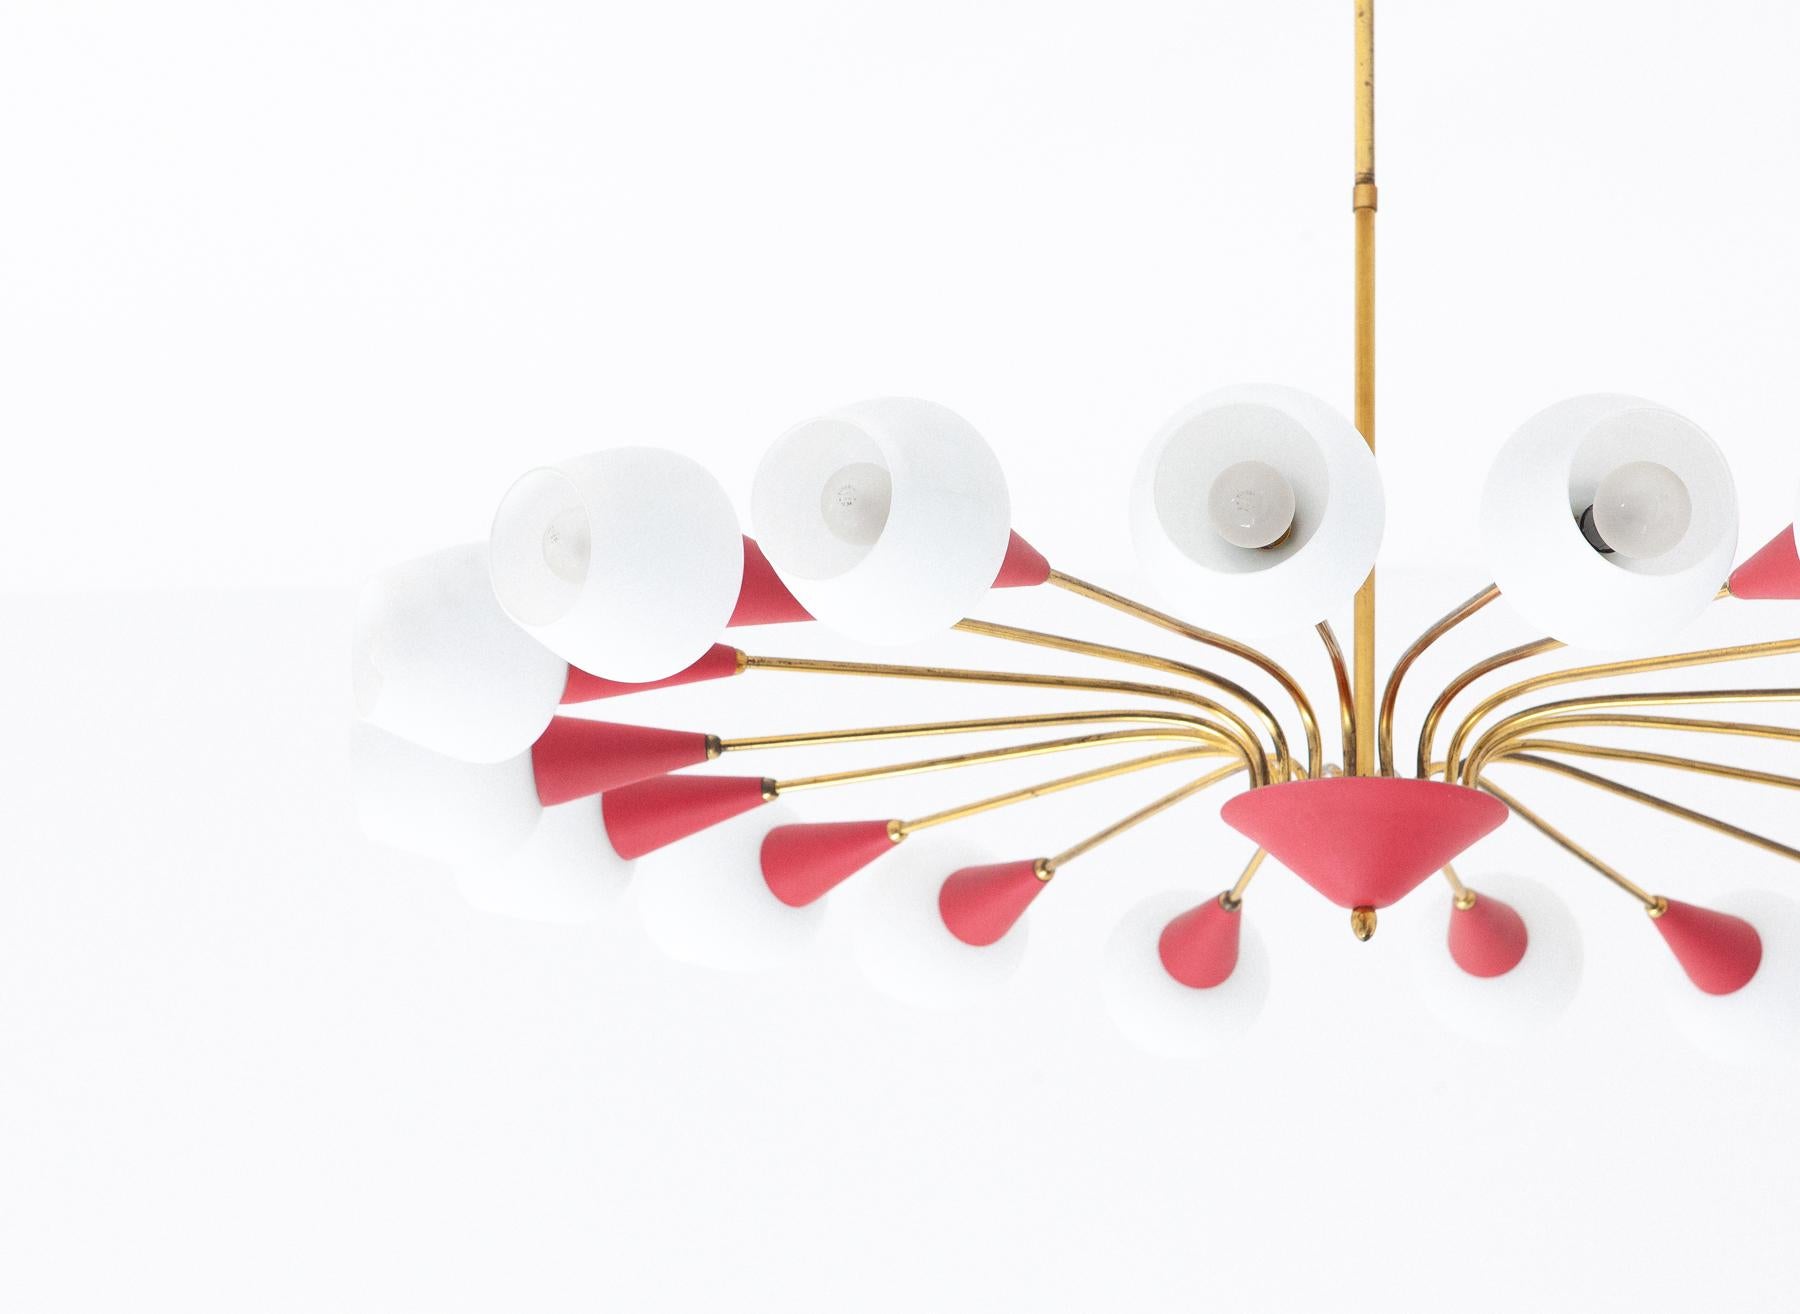 A very large eighteen-arm spider ceiling mount chandelier
A Mid-Century Modern pendant lamp manufactured in Italy in the 1950s.
Made of brass, light red painted metal and white opal glass lamp shades.

Original working wire
The lamp has 18 sockets